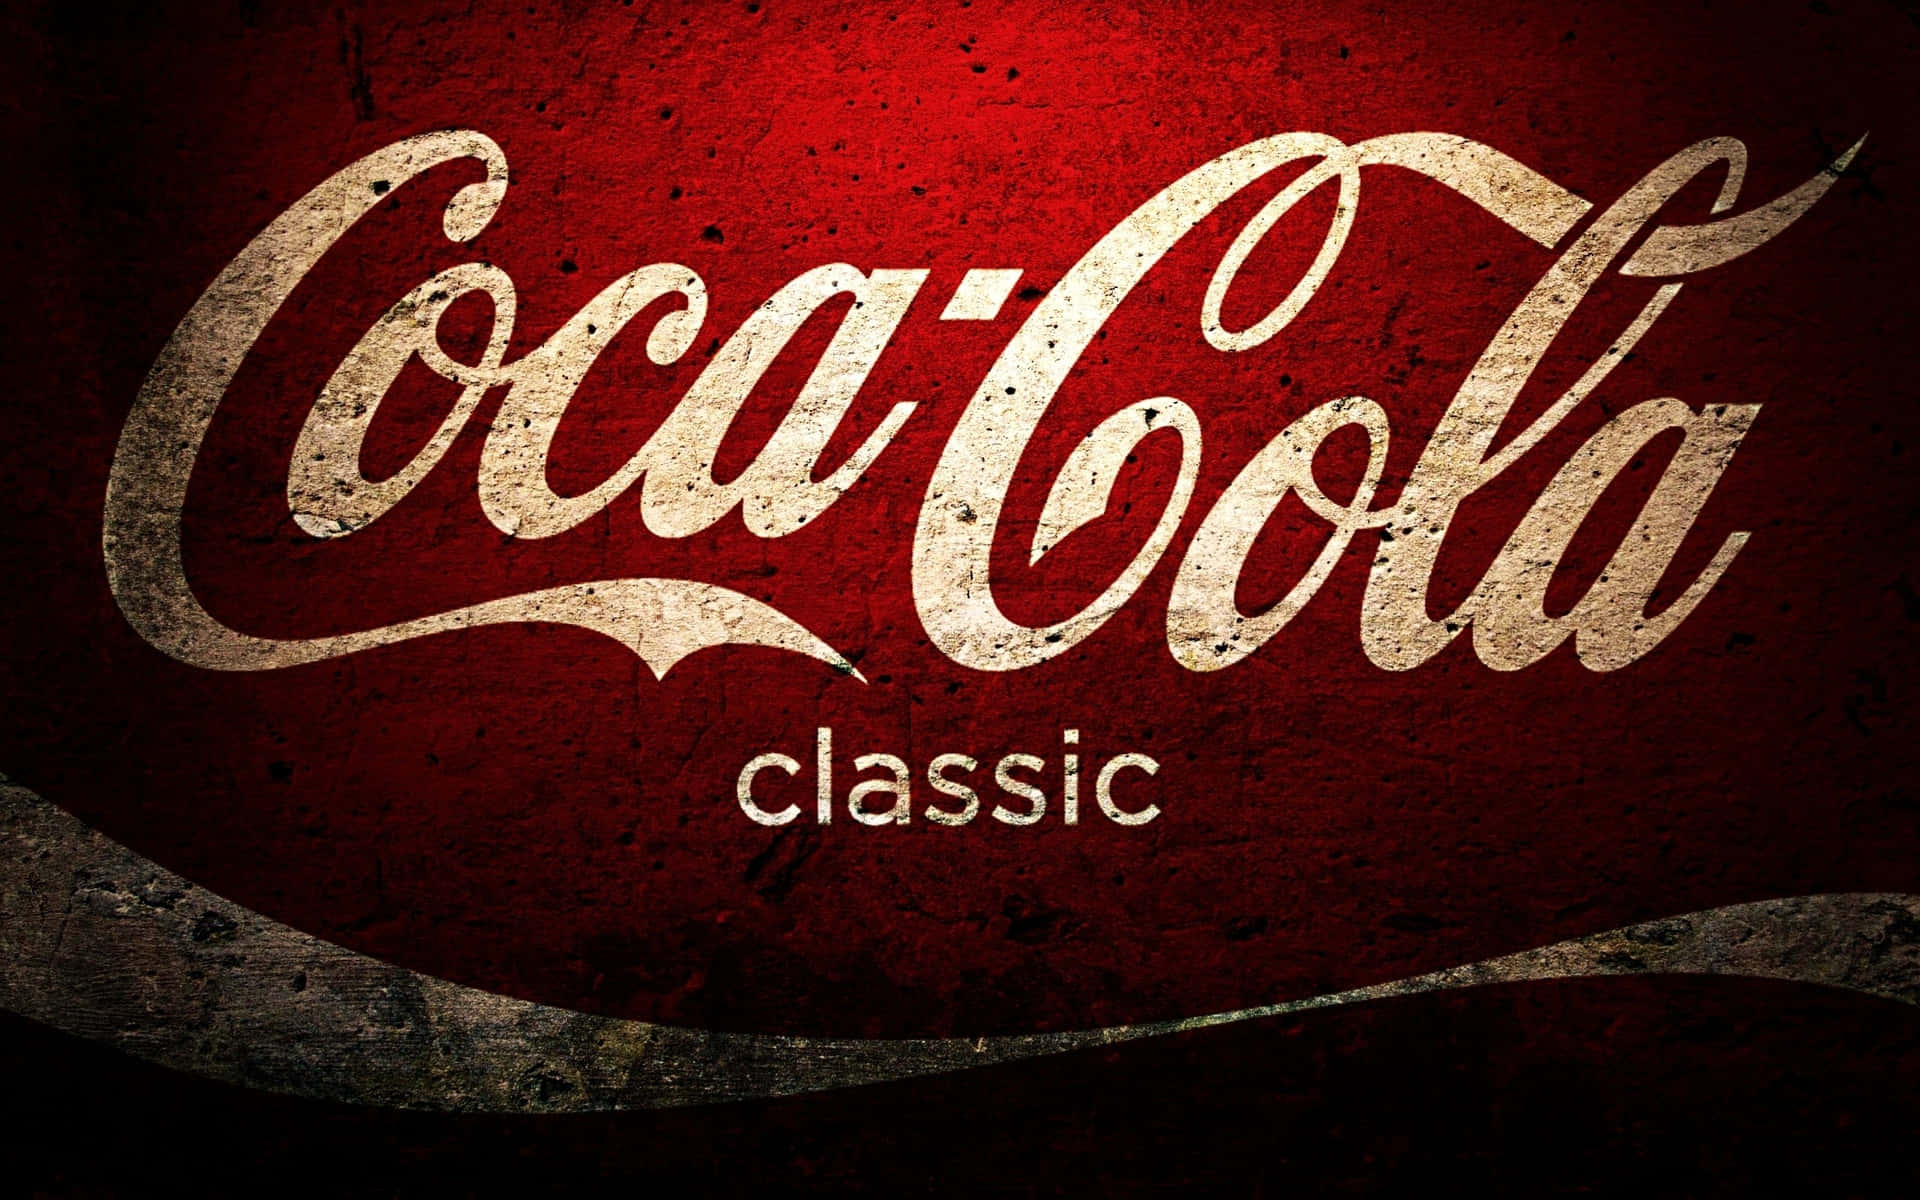 Coca Classic Logo On A Red Background